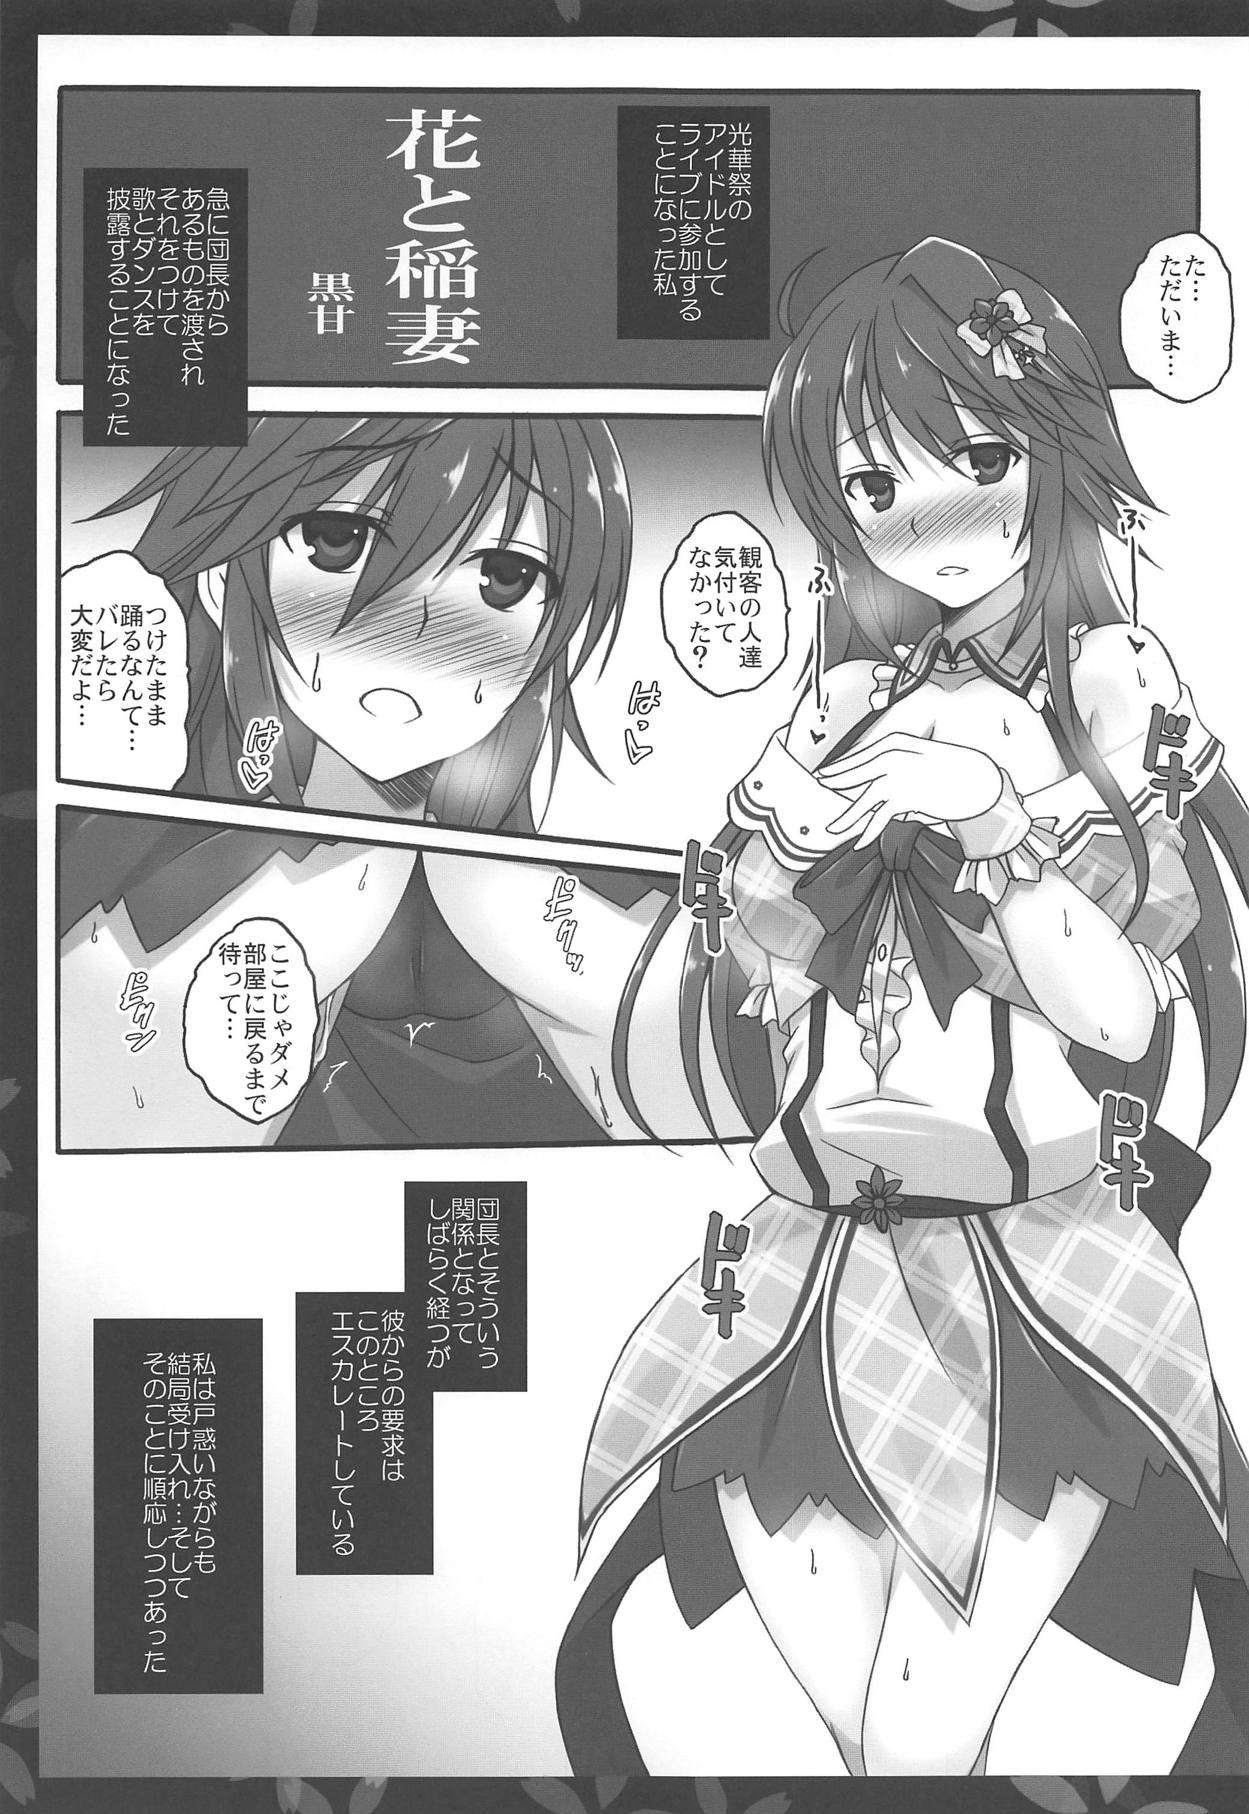 Fat Hana to Inazuma - Flower knight girl Ass To Mouth - Page 4